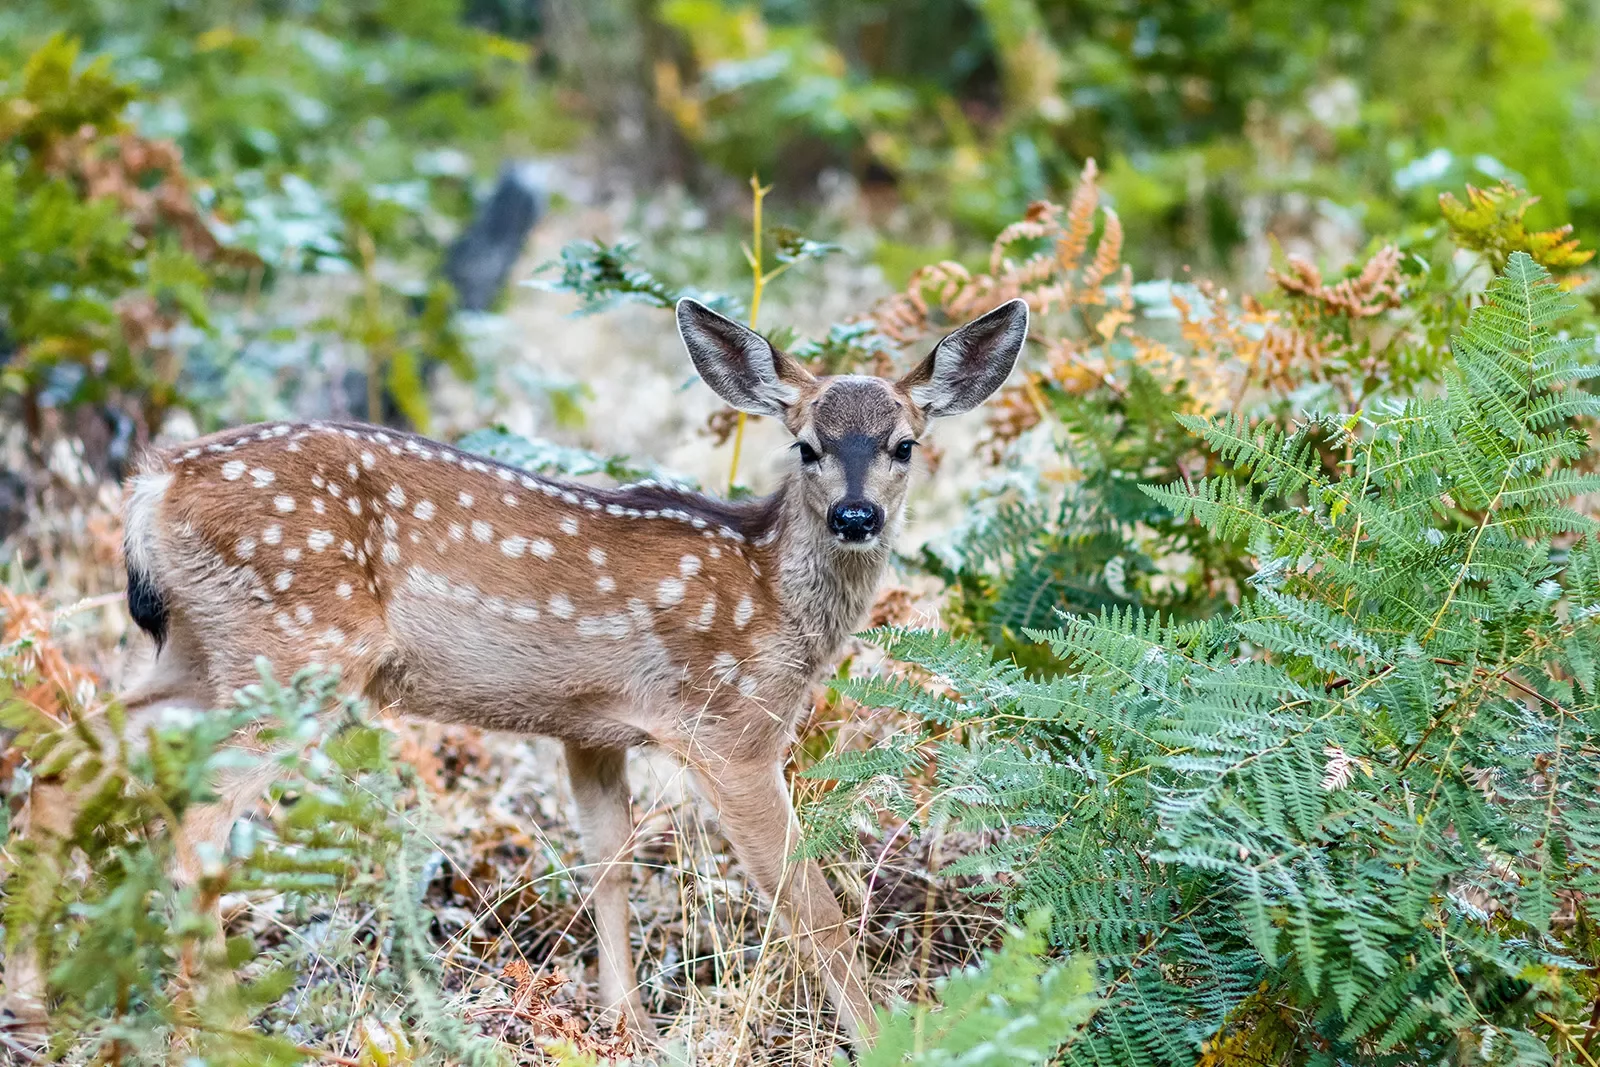 Deer among the greenery of a forest.